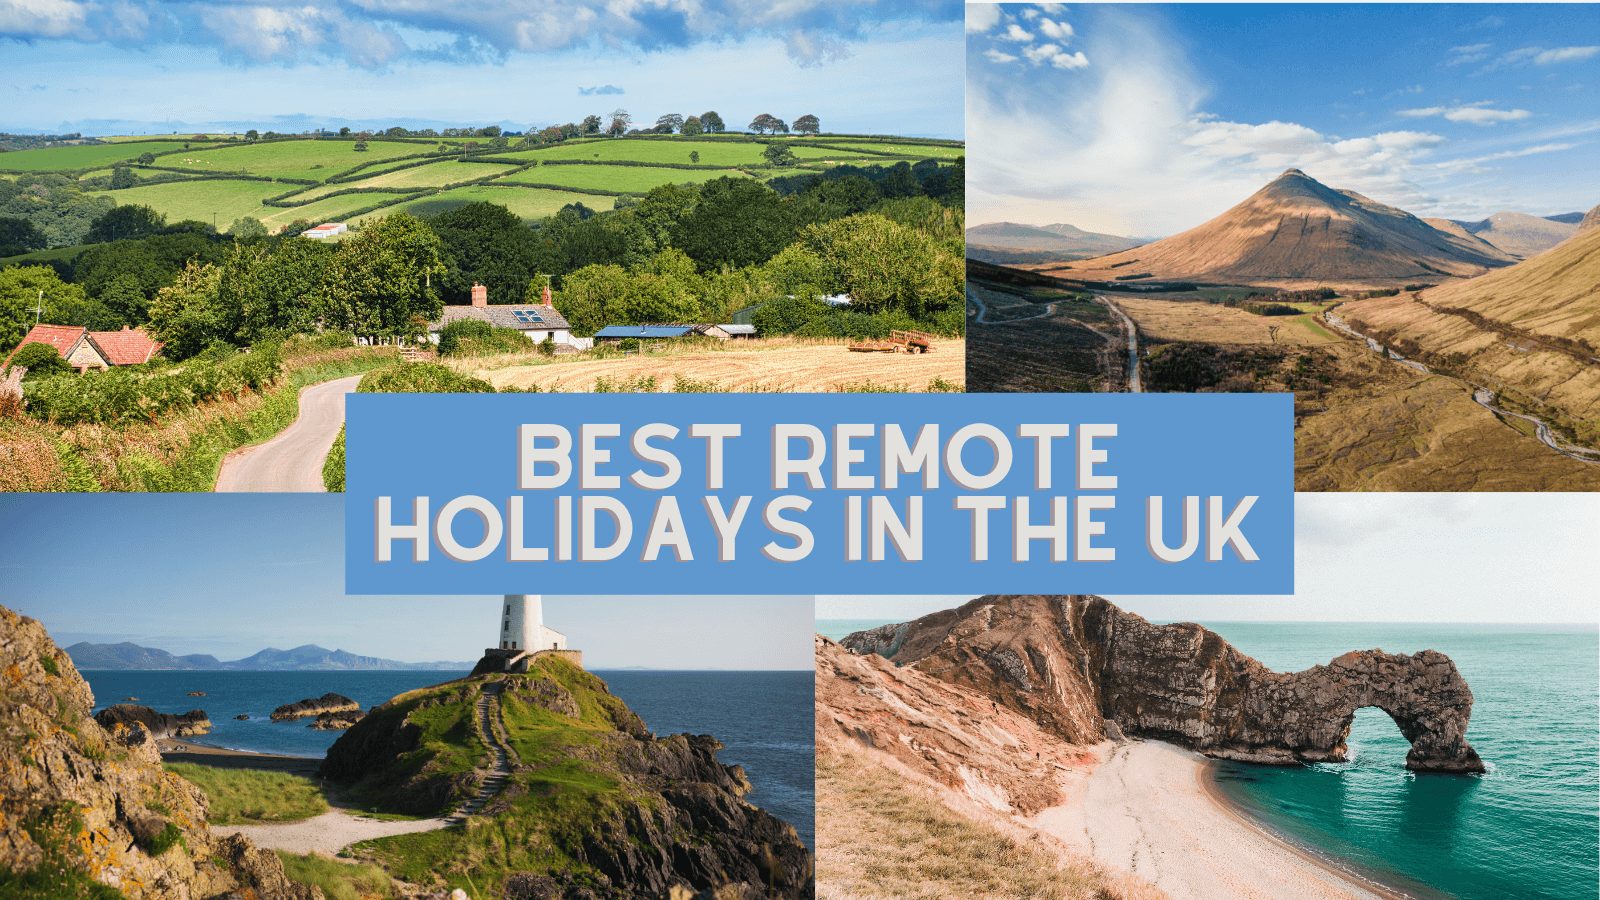 Best remote holidays in the Uk